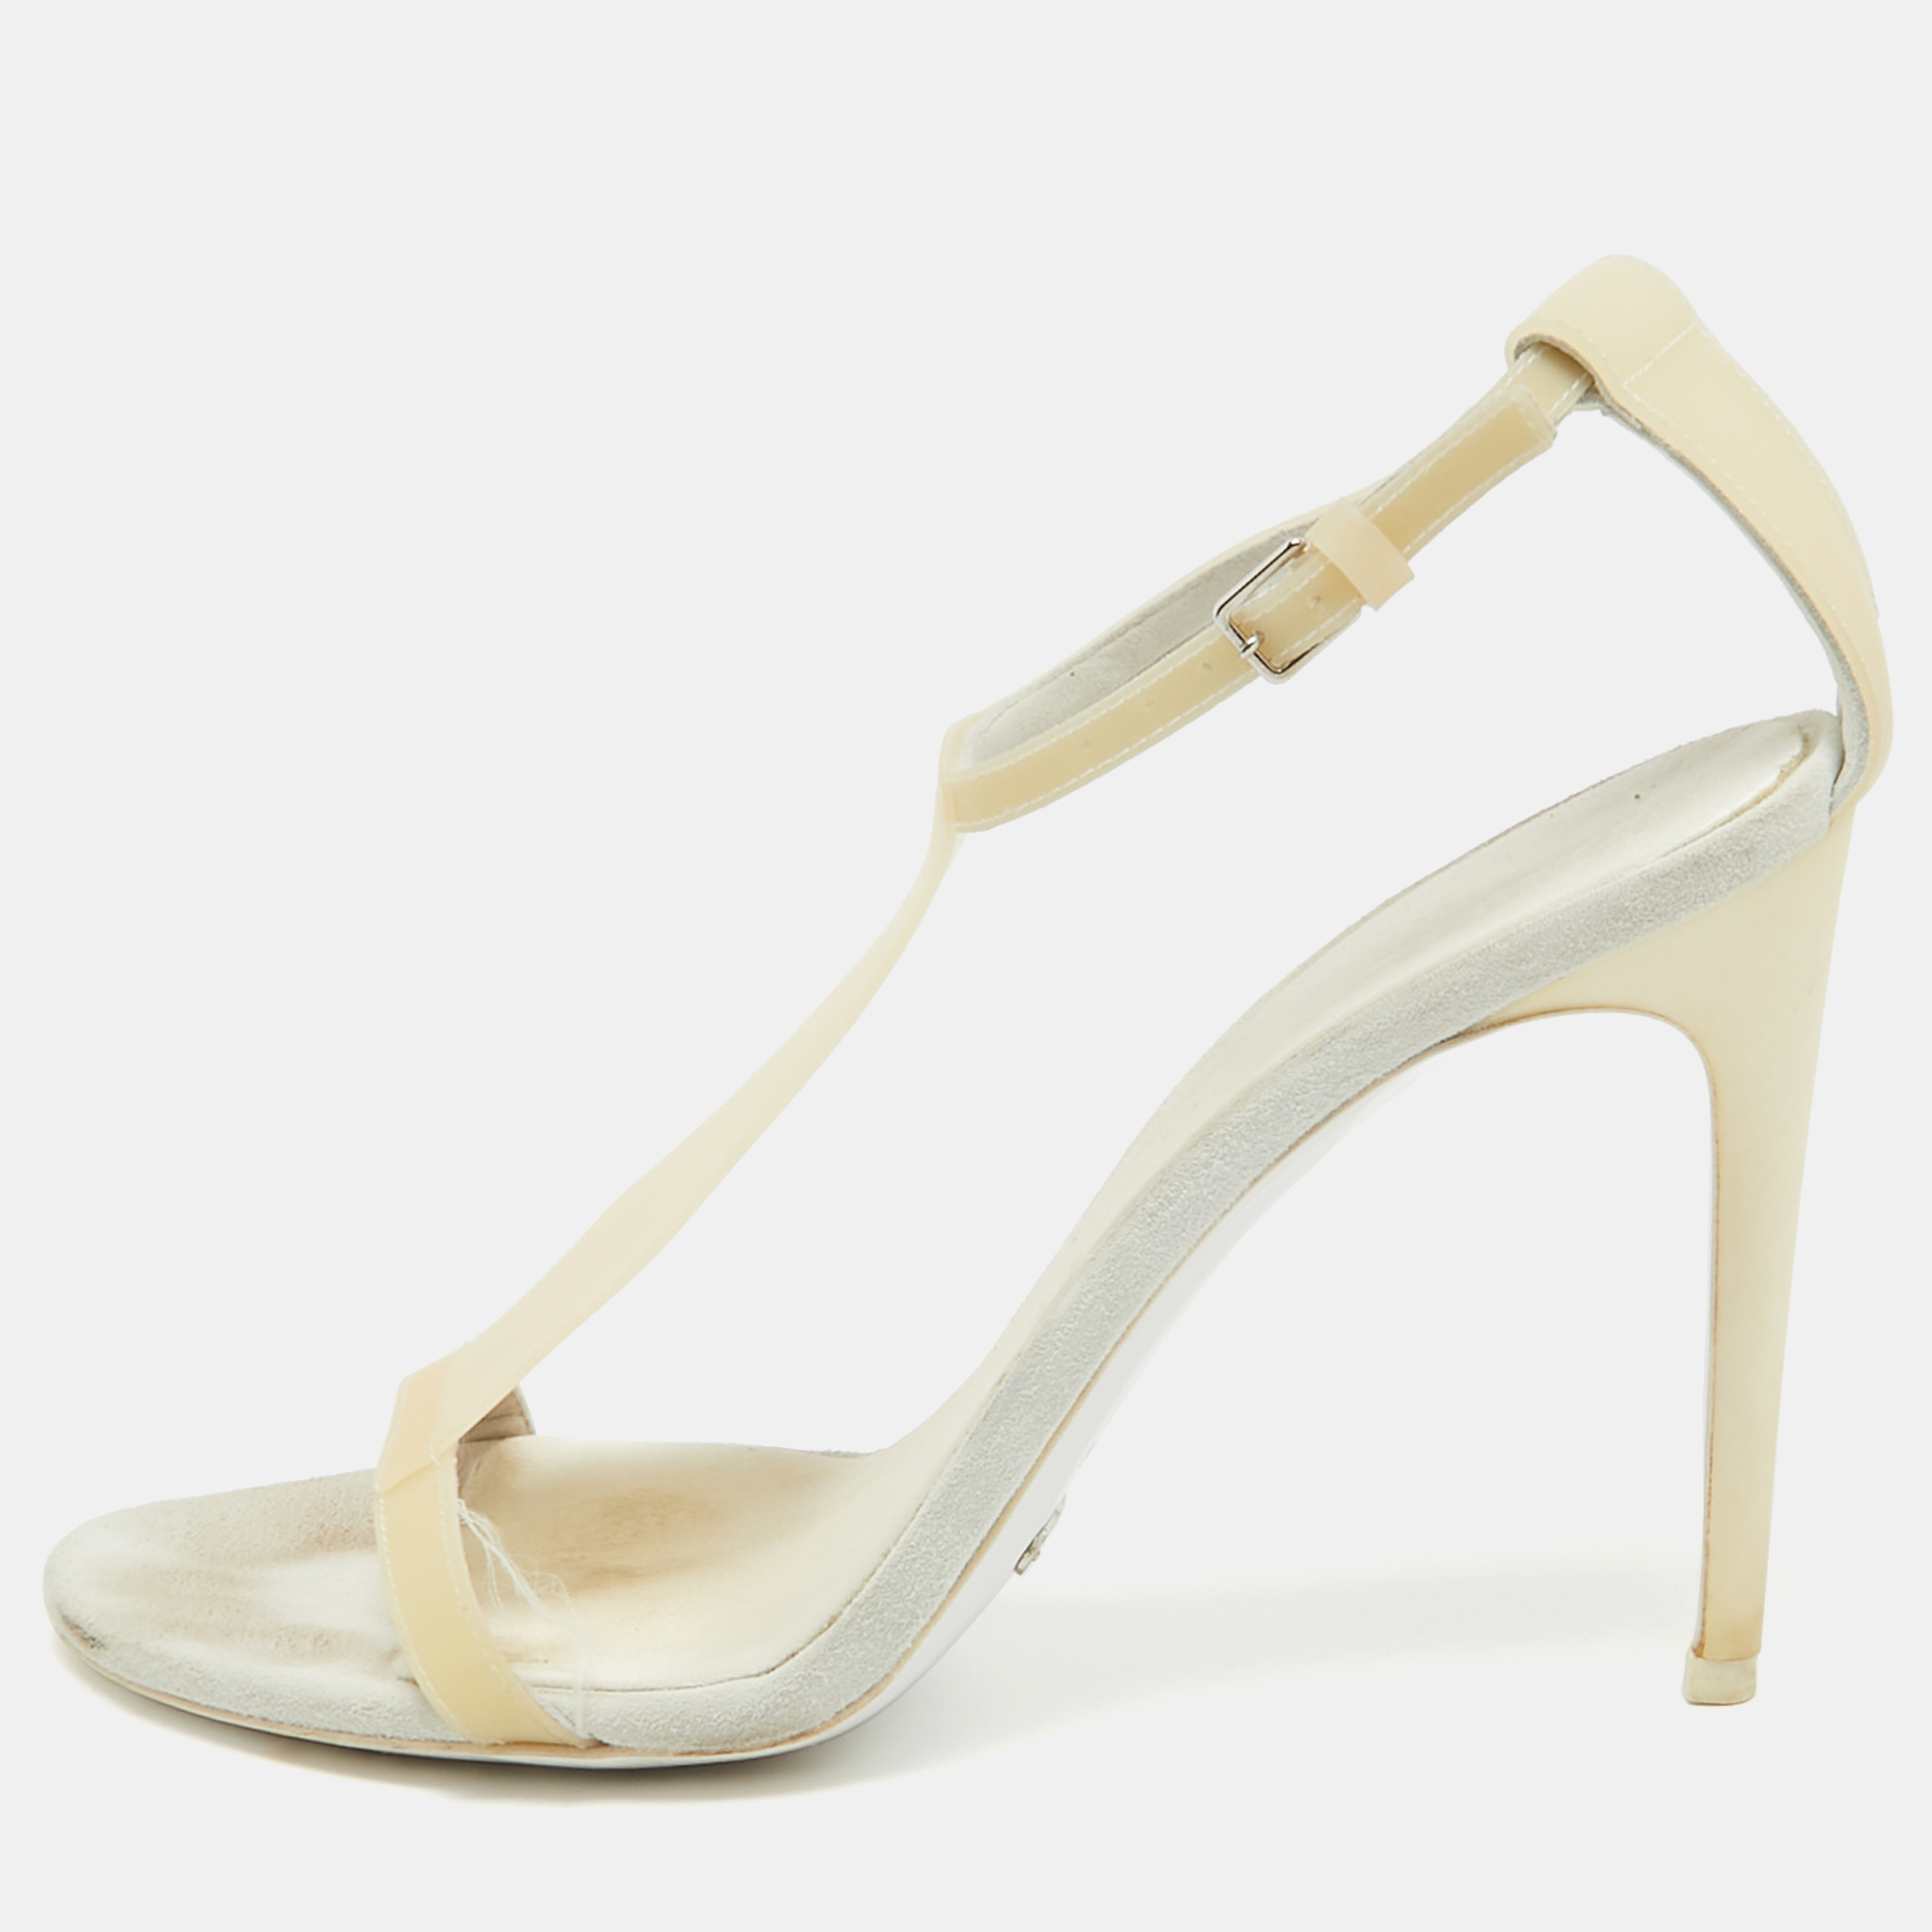 Burberry cream pvc and suede ankle strap sandals size 39